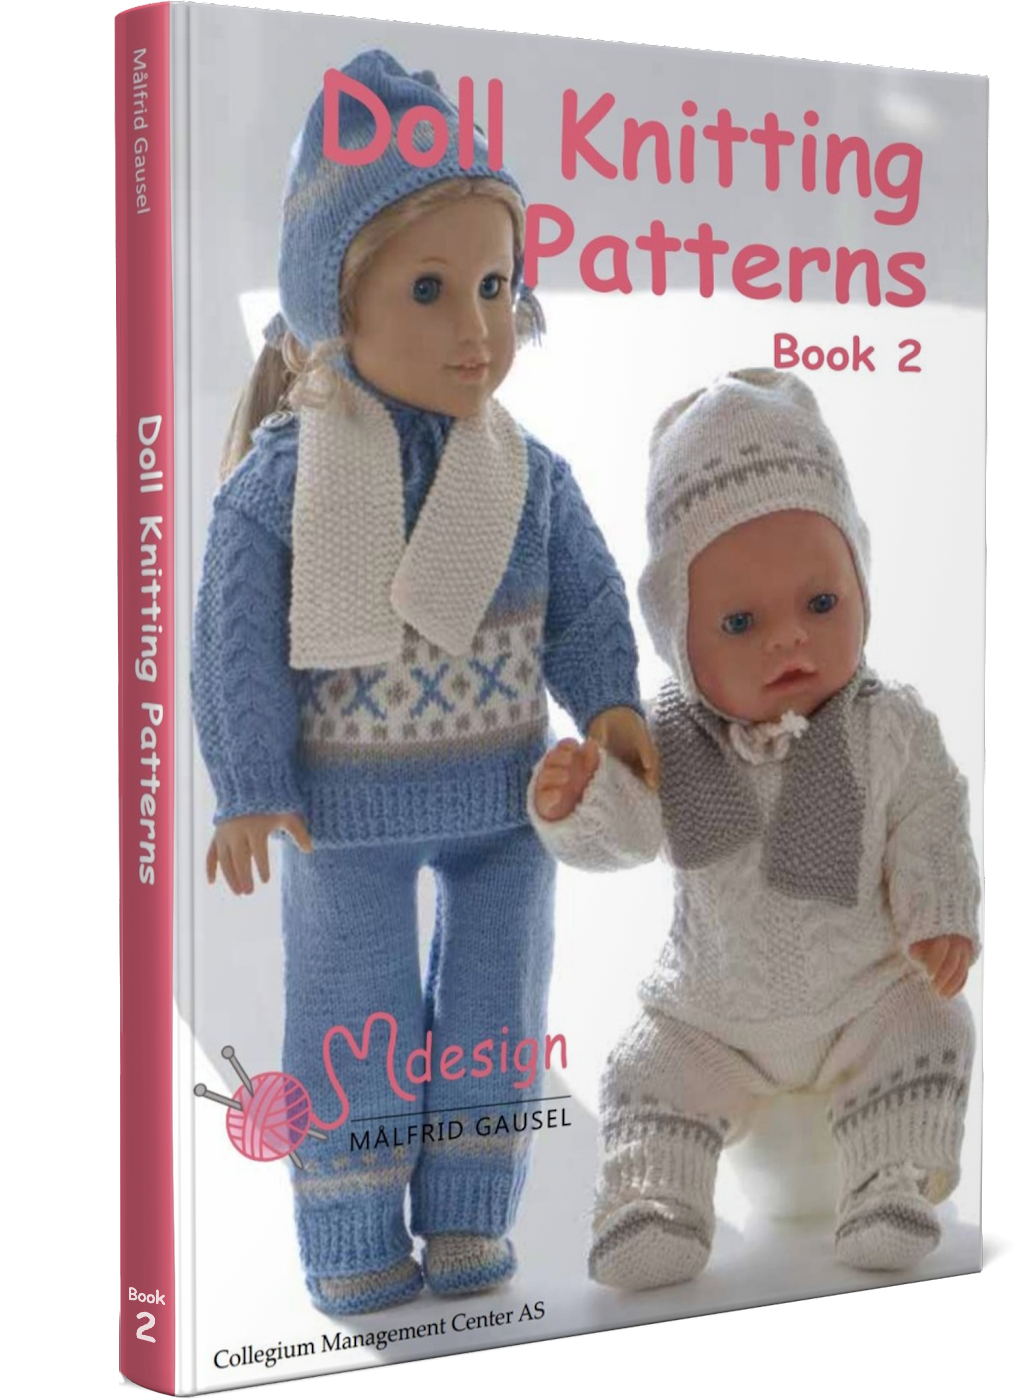 Doll Knitting Book 2 contains 19 unique, unpublished patterns